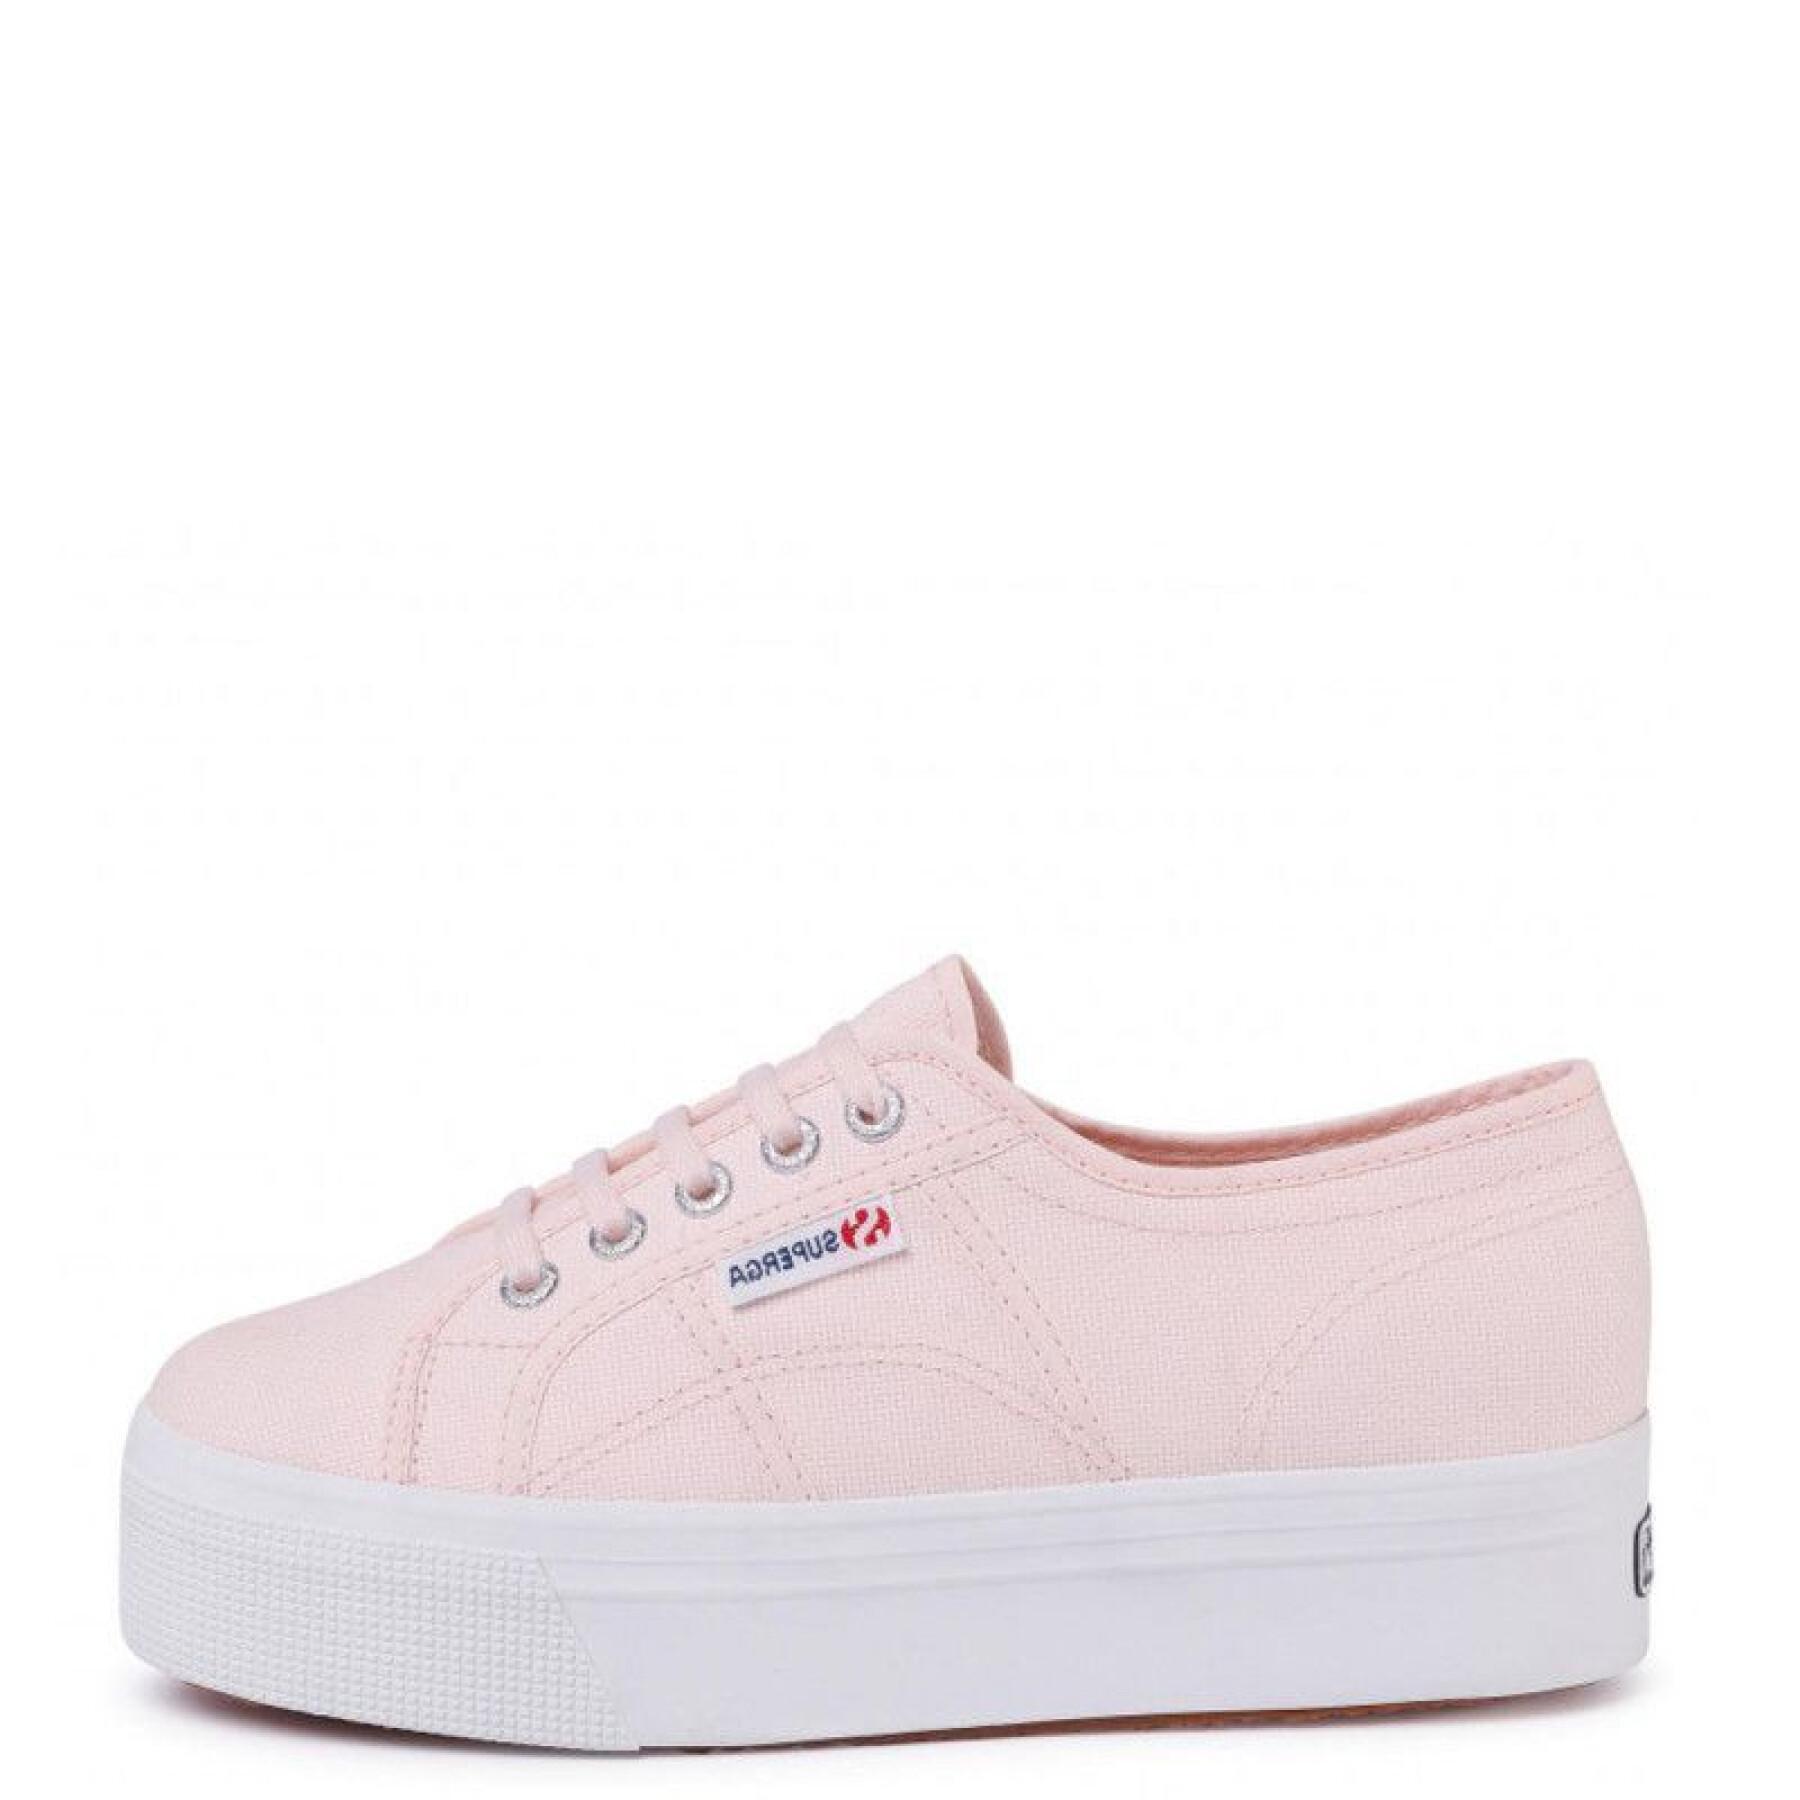 Women's sneakers Superga 2790 Acotw Linea Up And Down